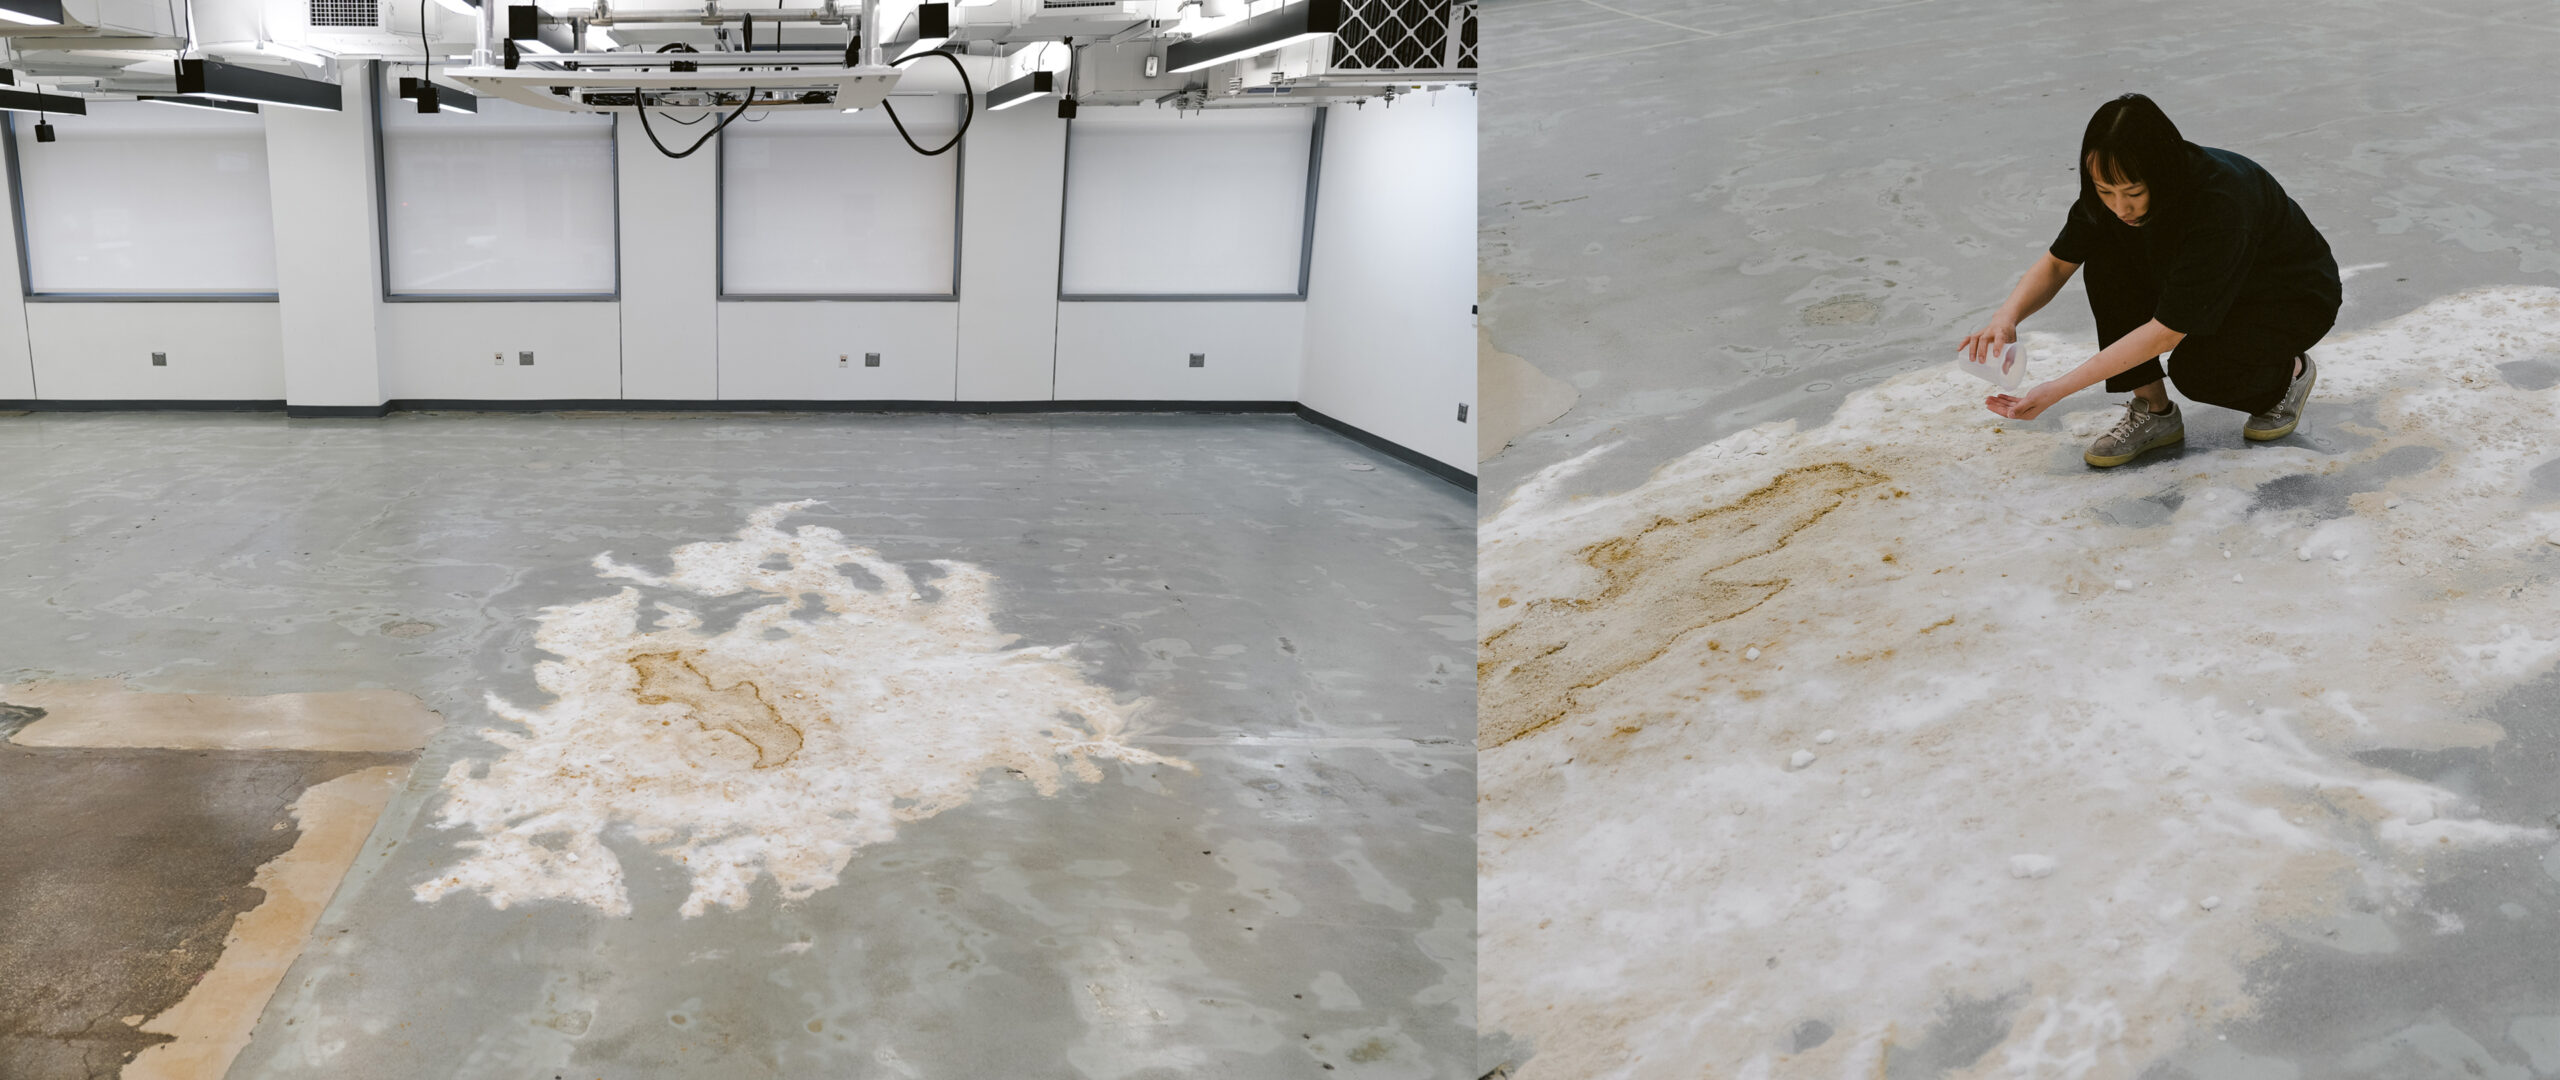 a salt-scape installation in a room, and the artist is creating it.